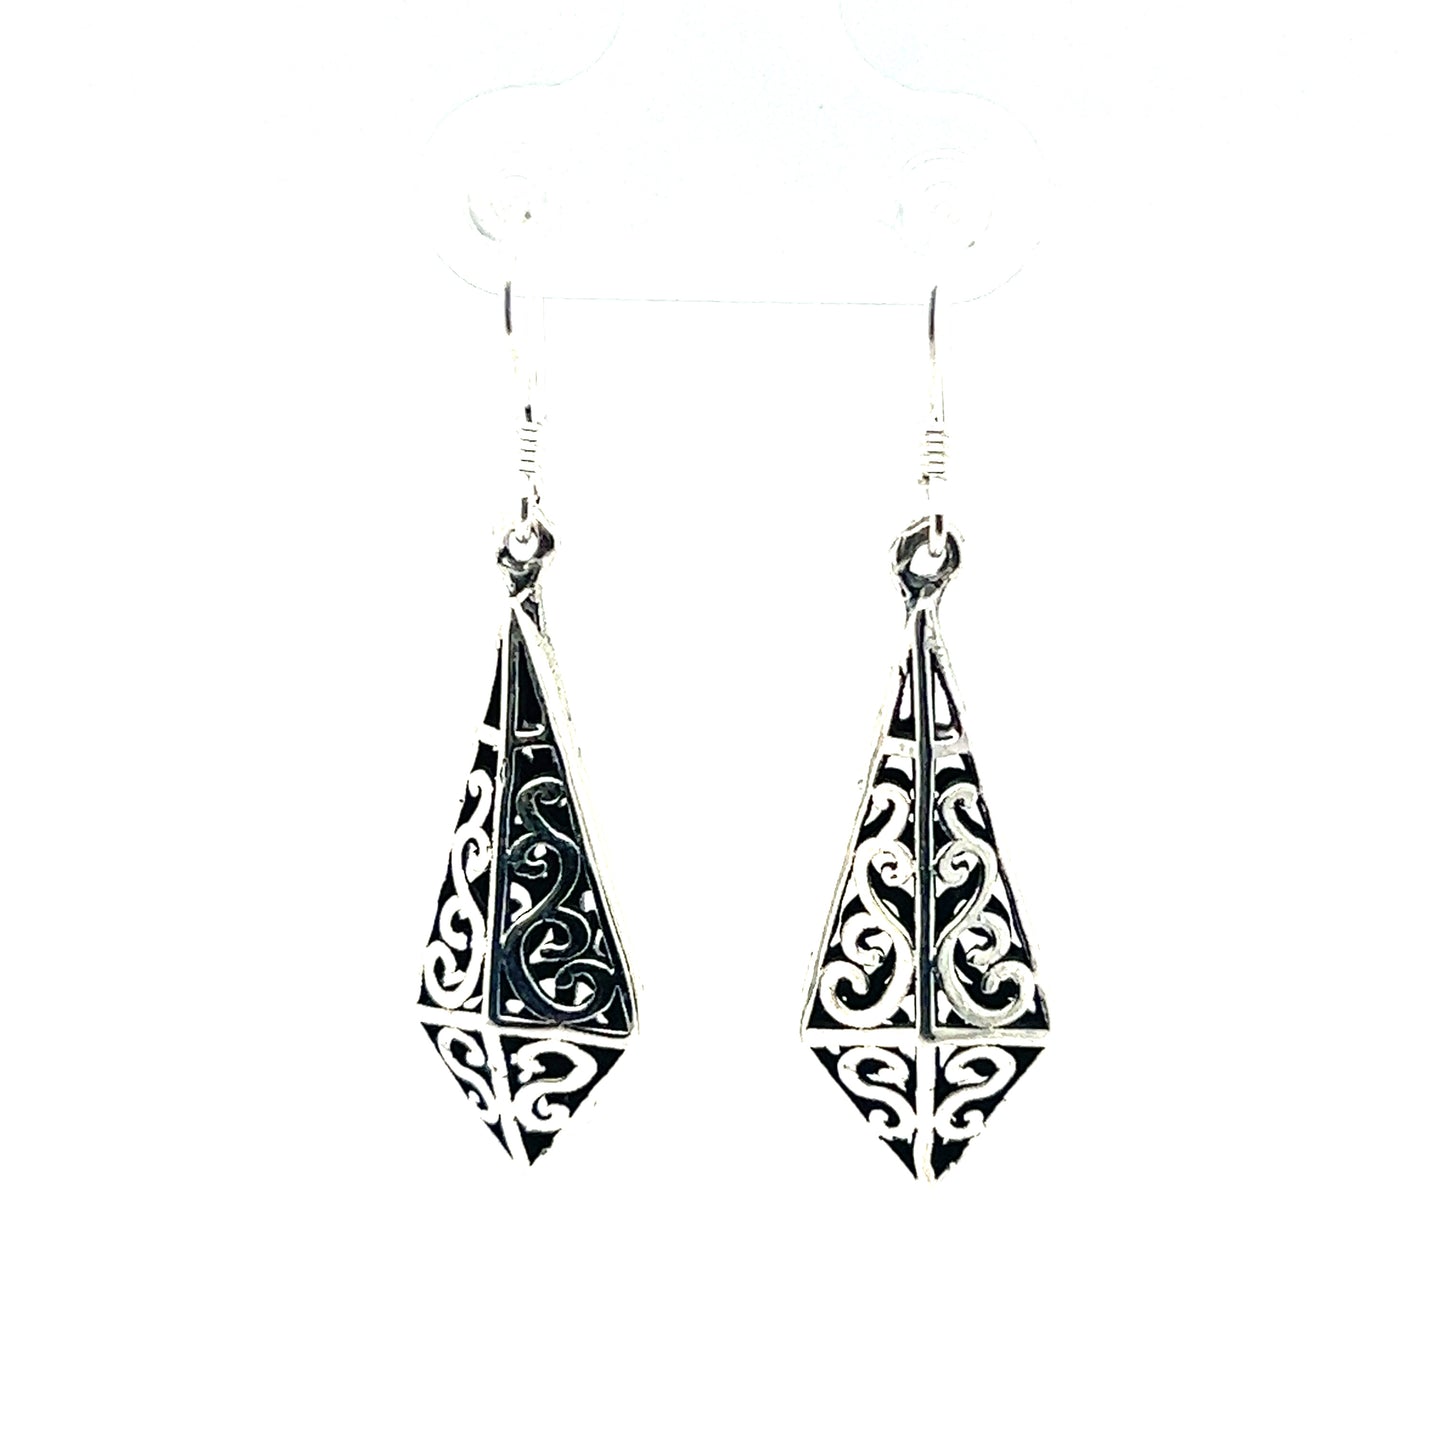 A pair of Super Silver 8-Sided Upside Down Diamond Filigree Earrings.